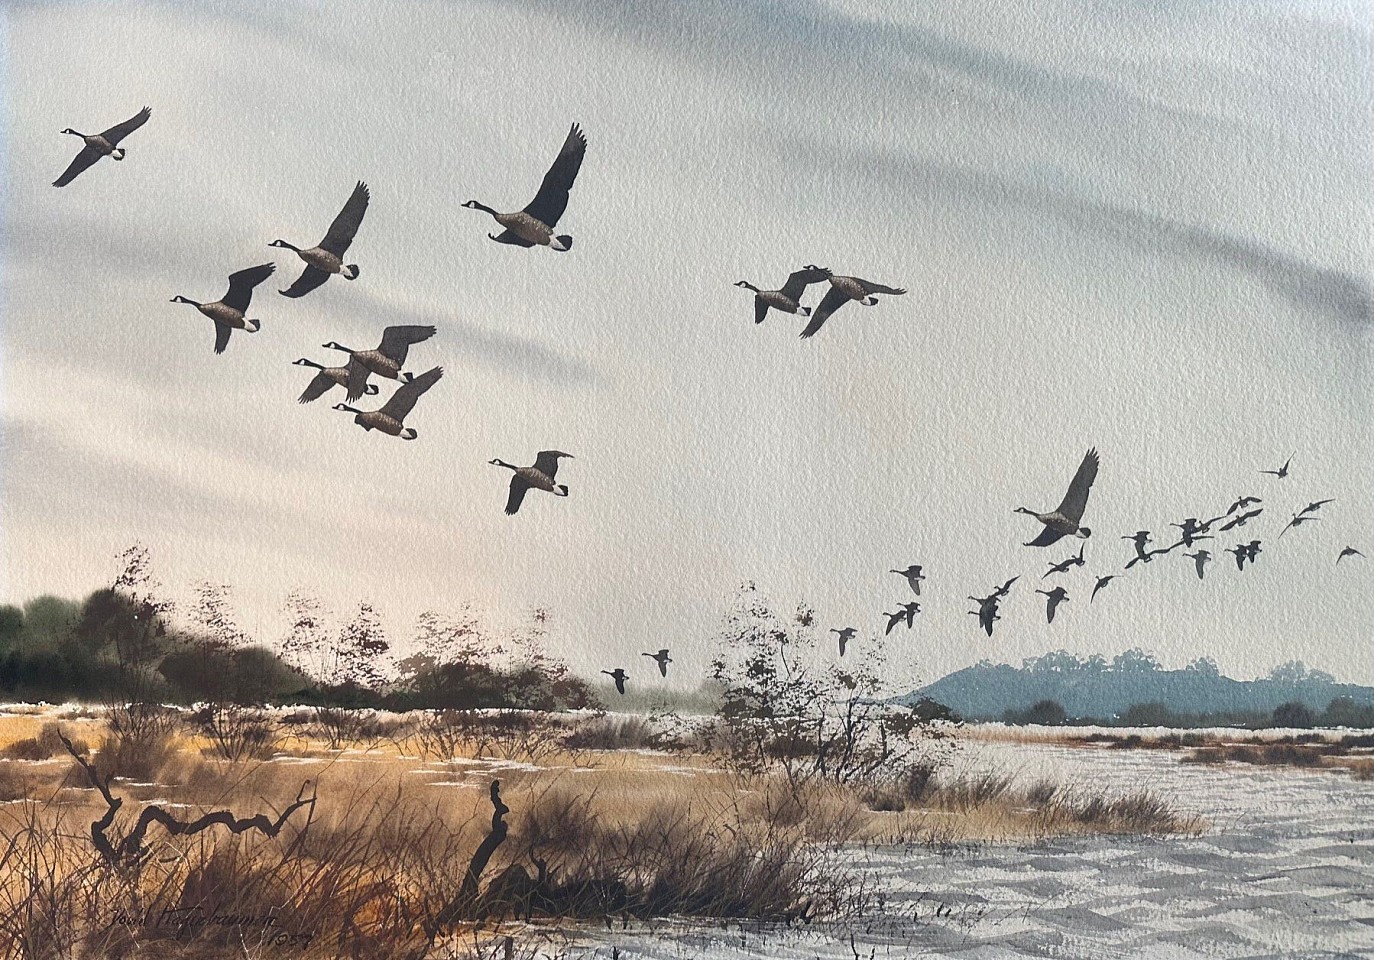 David Hagerbaumer, Flying Geese, 1957
watercolor on paper
SG1123
$3,500